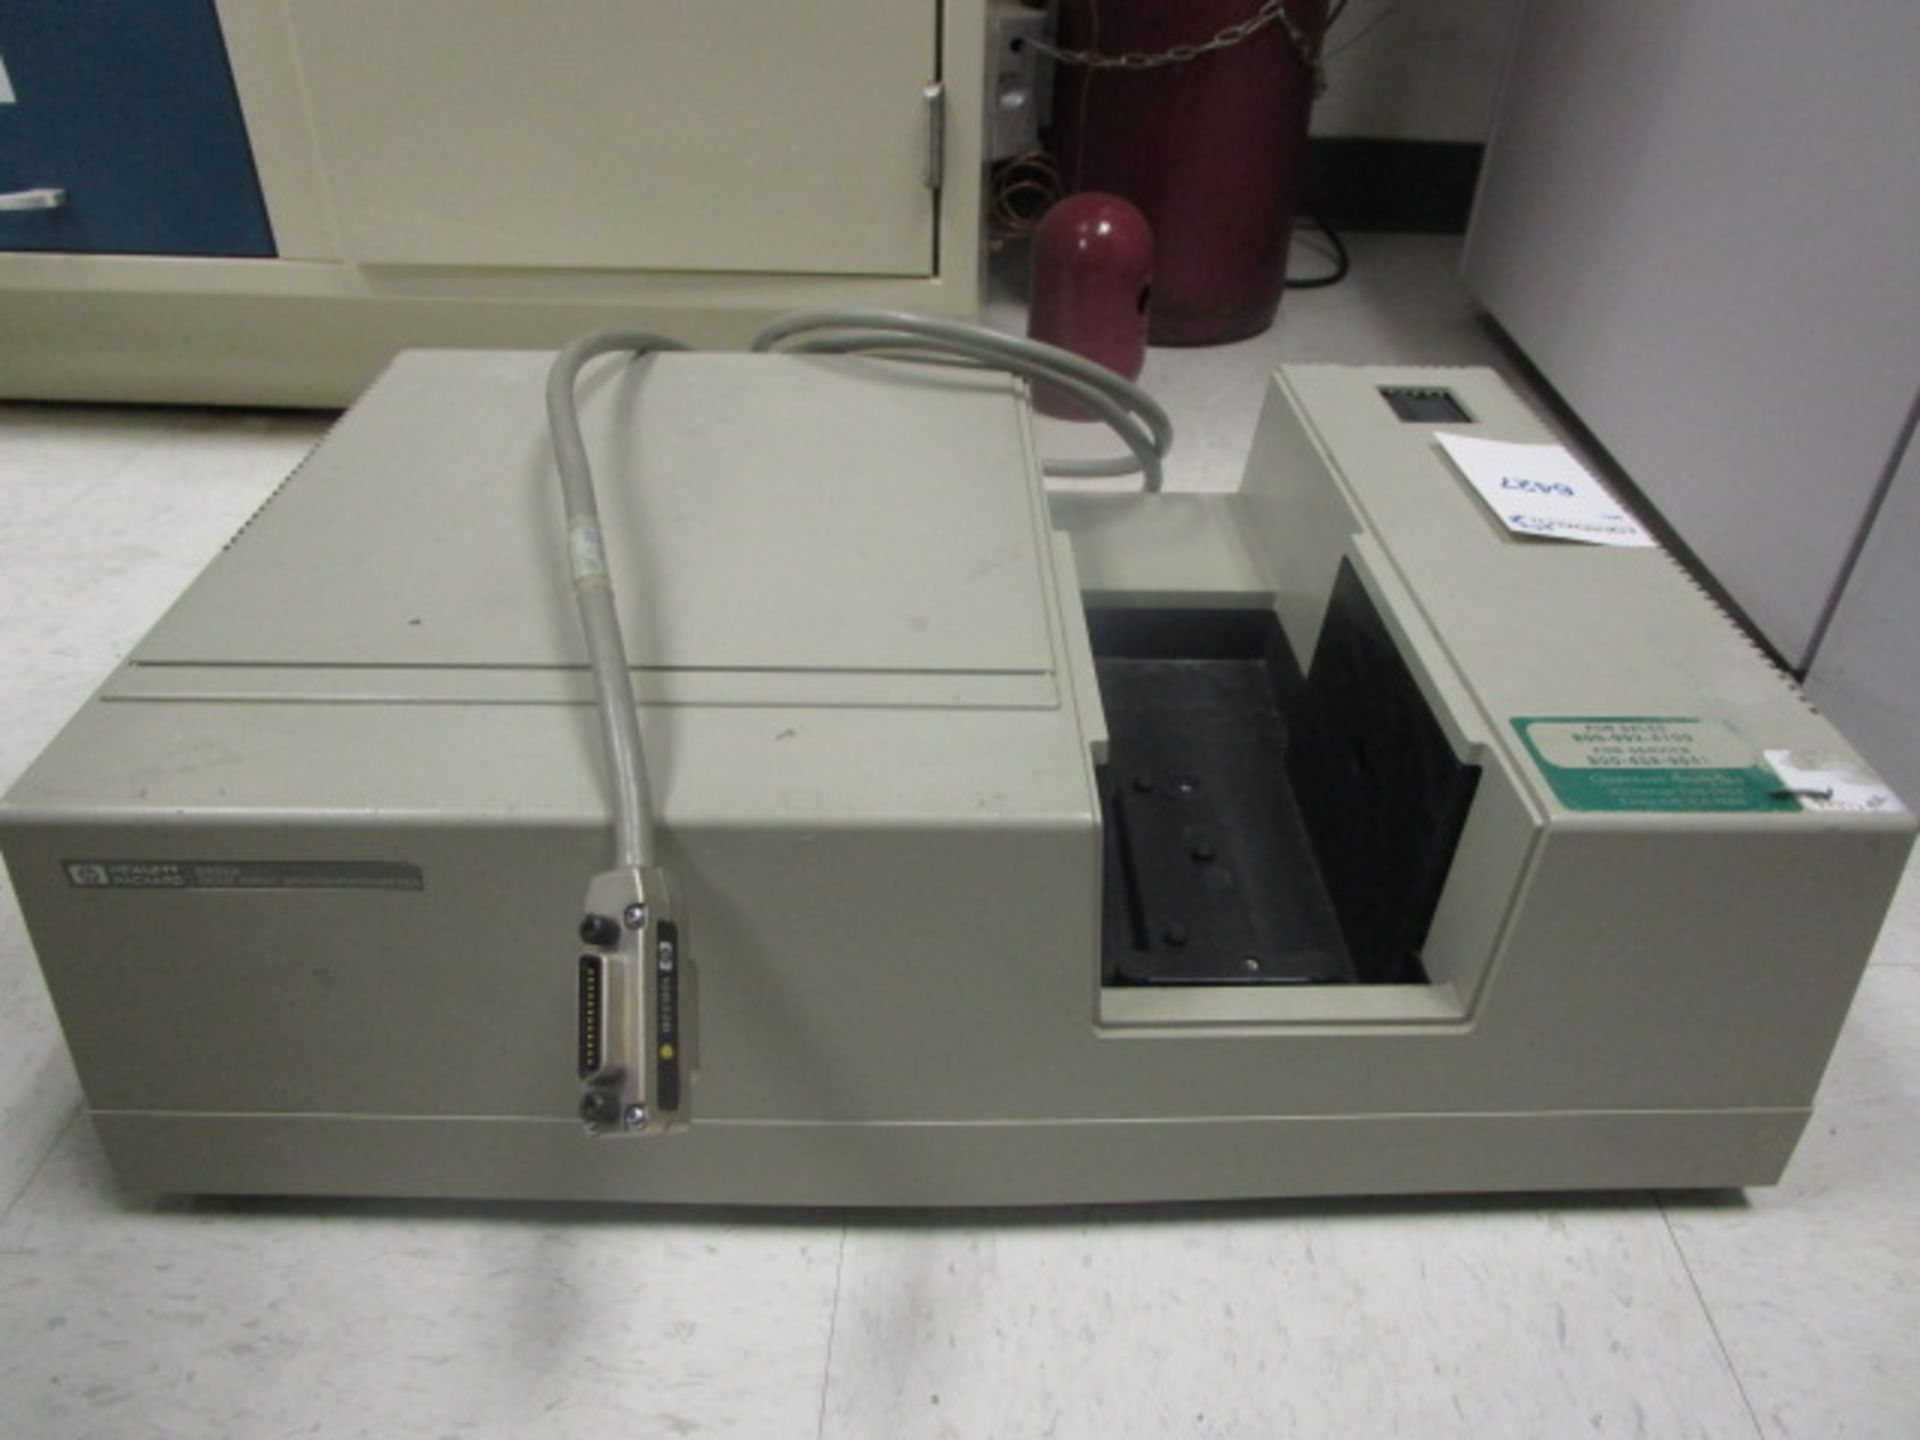 Hewlett Packard 8452 UV-Vis Spectro Photometer with gpib cable (for parts)